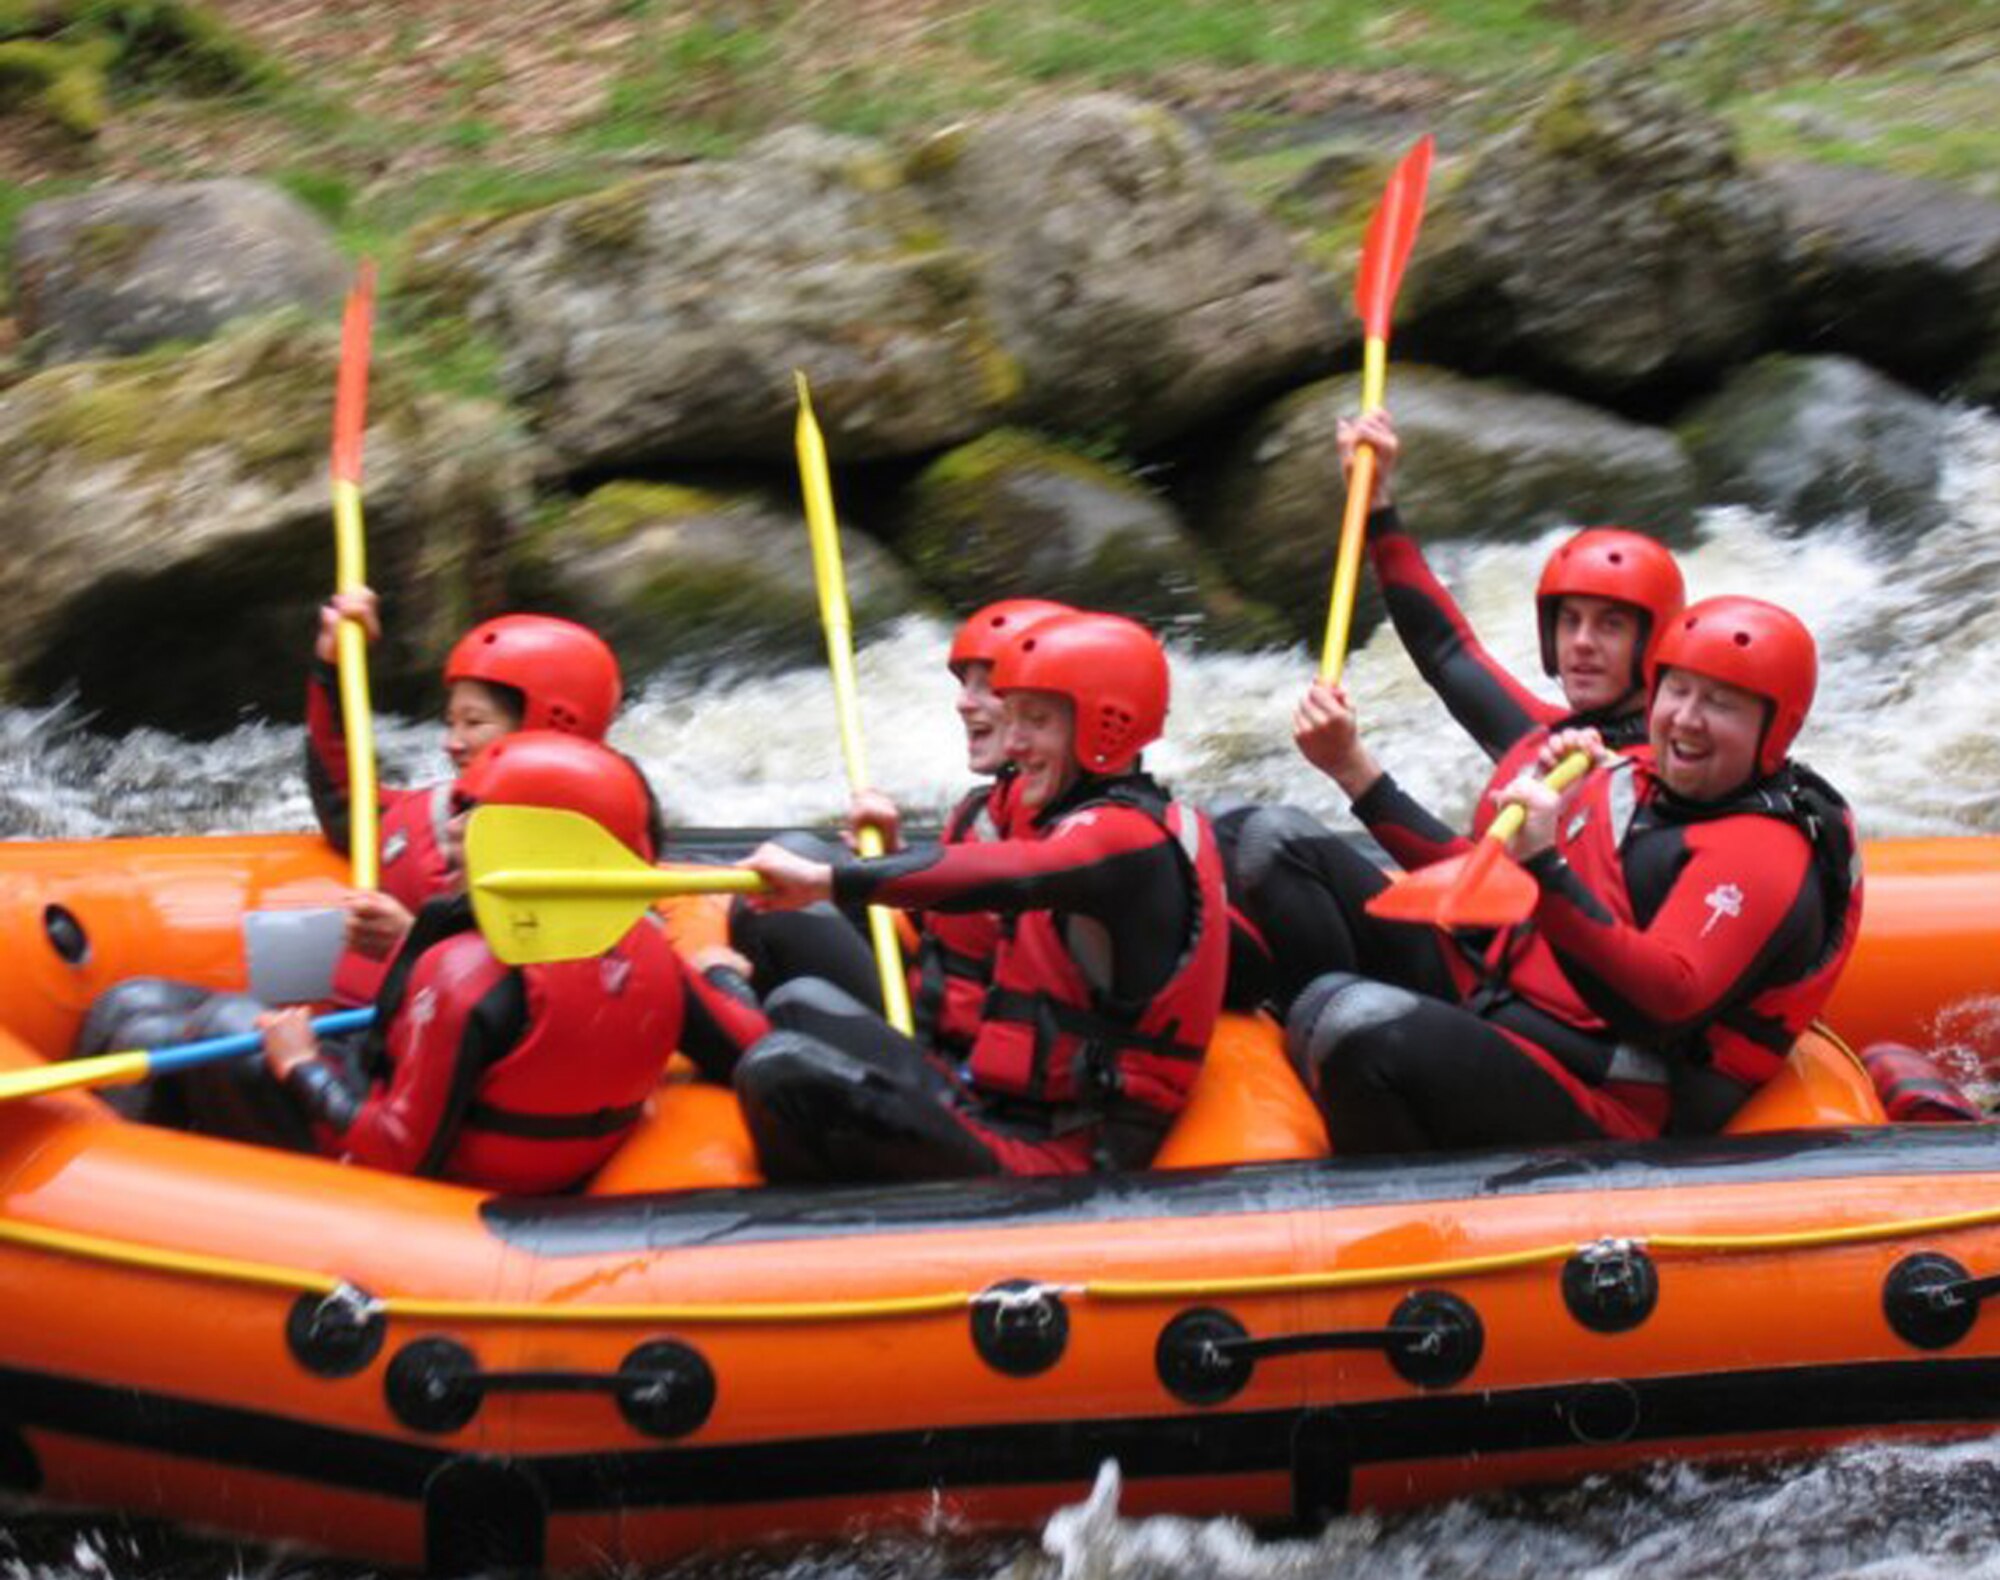 Airmen from the Single Airmen’s Ministry prepare to get even wetter as they enjoy a white-water rafting trip in Wales. People from RAF Alconbury were also on the SAM trip. The SAM and its activities are open to all single Airmen in England. (U.S. Air Force courtesy photo)